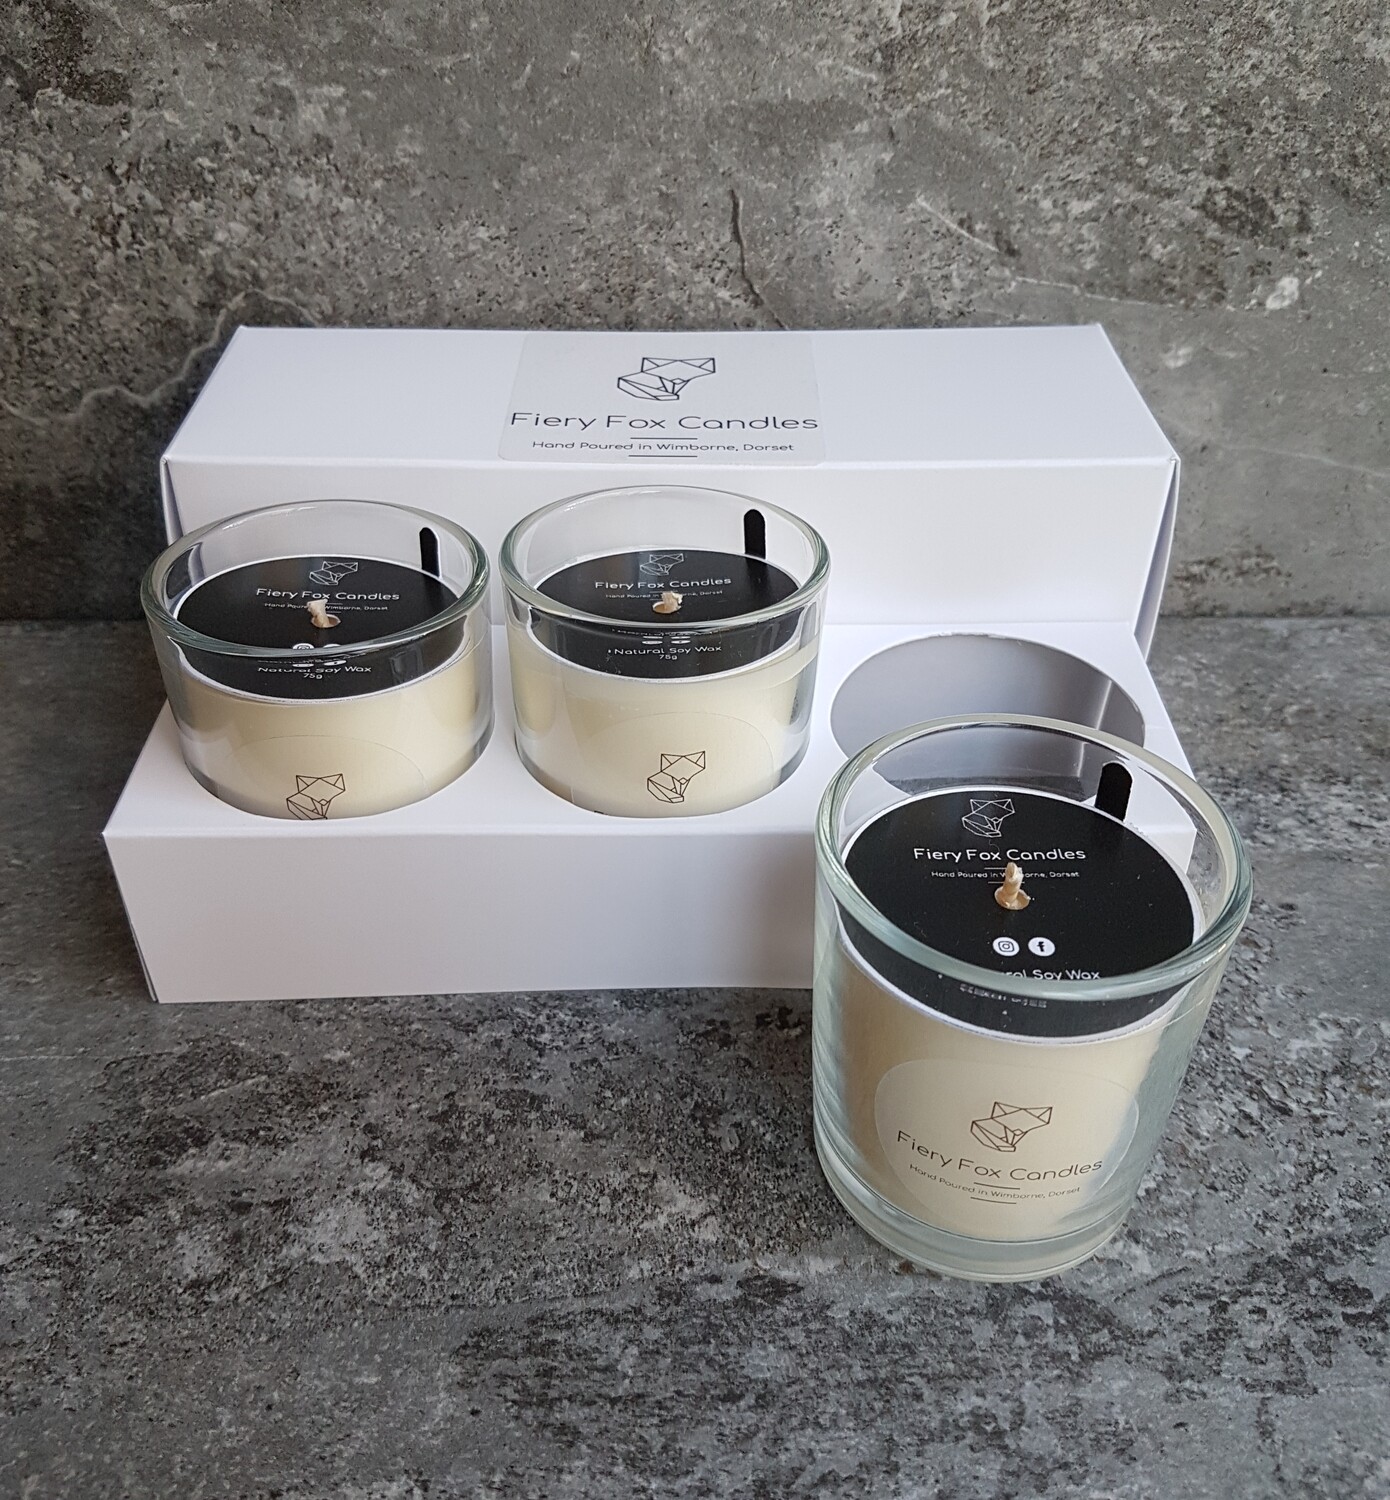 3 x 9cl Soy Wax Votive Candles in presentation box